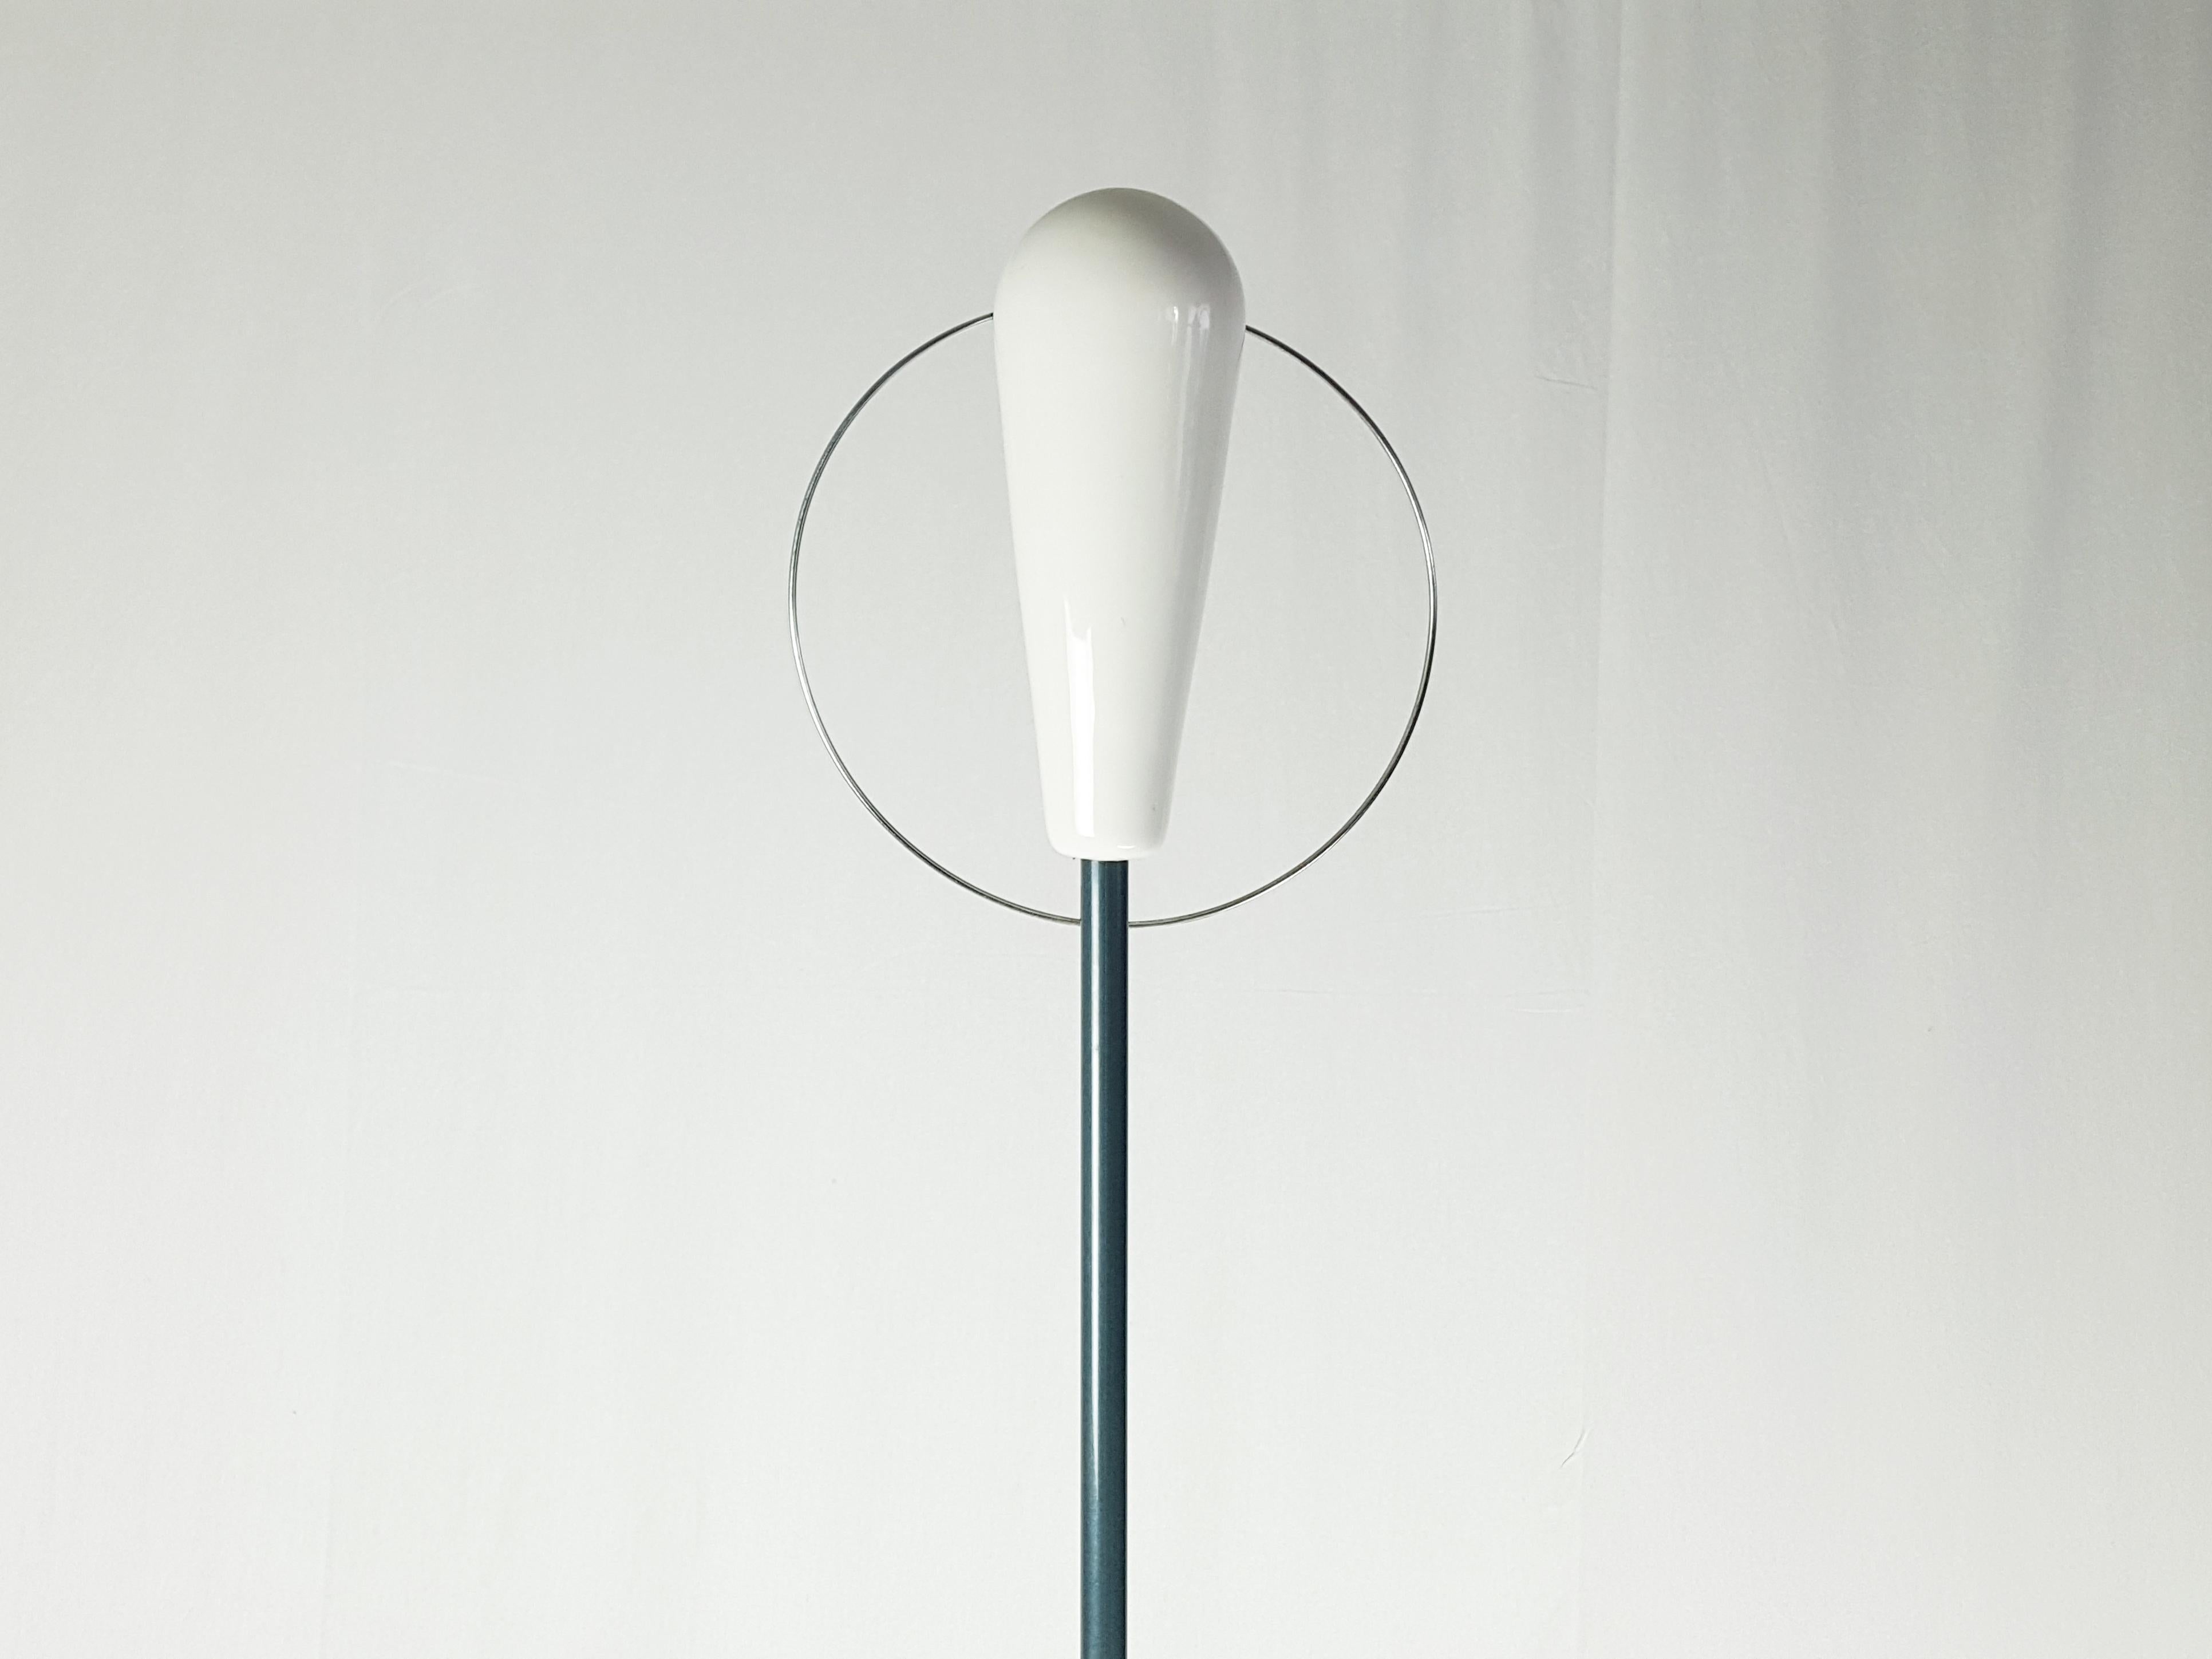 Late 20th Century Bip Bip Floor Lamp by Achille Castiglioni for Flos, 1976